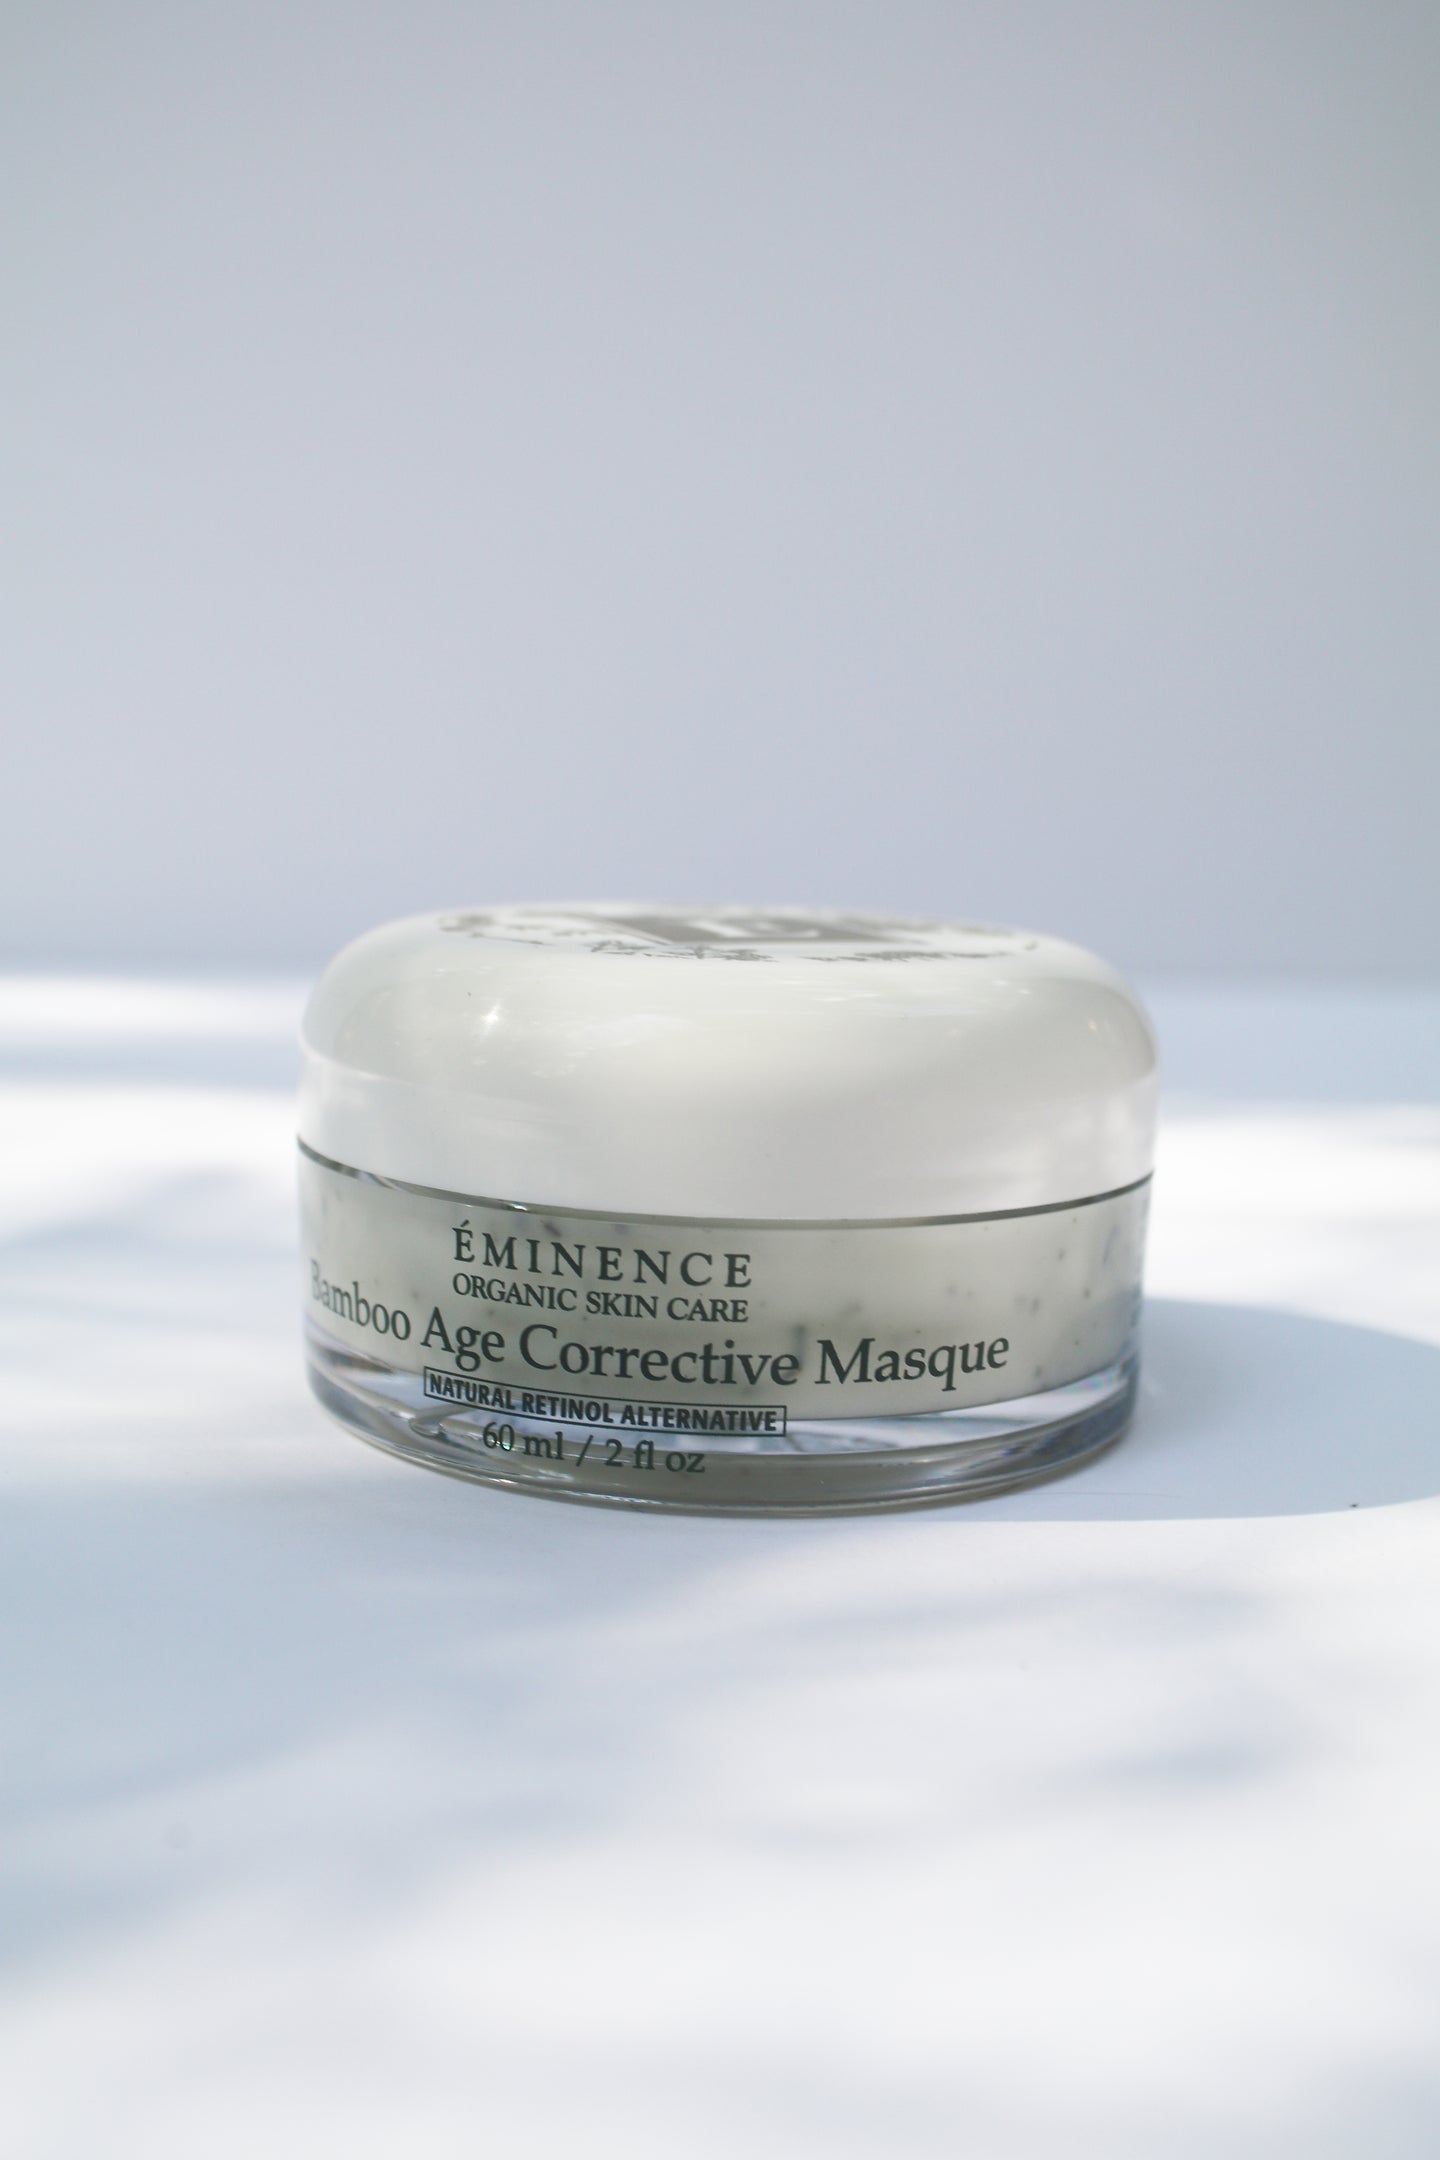 a jar of Bamboo Age Corrective Masque by Eminence